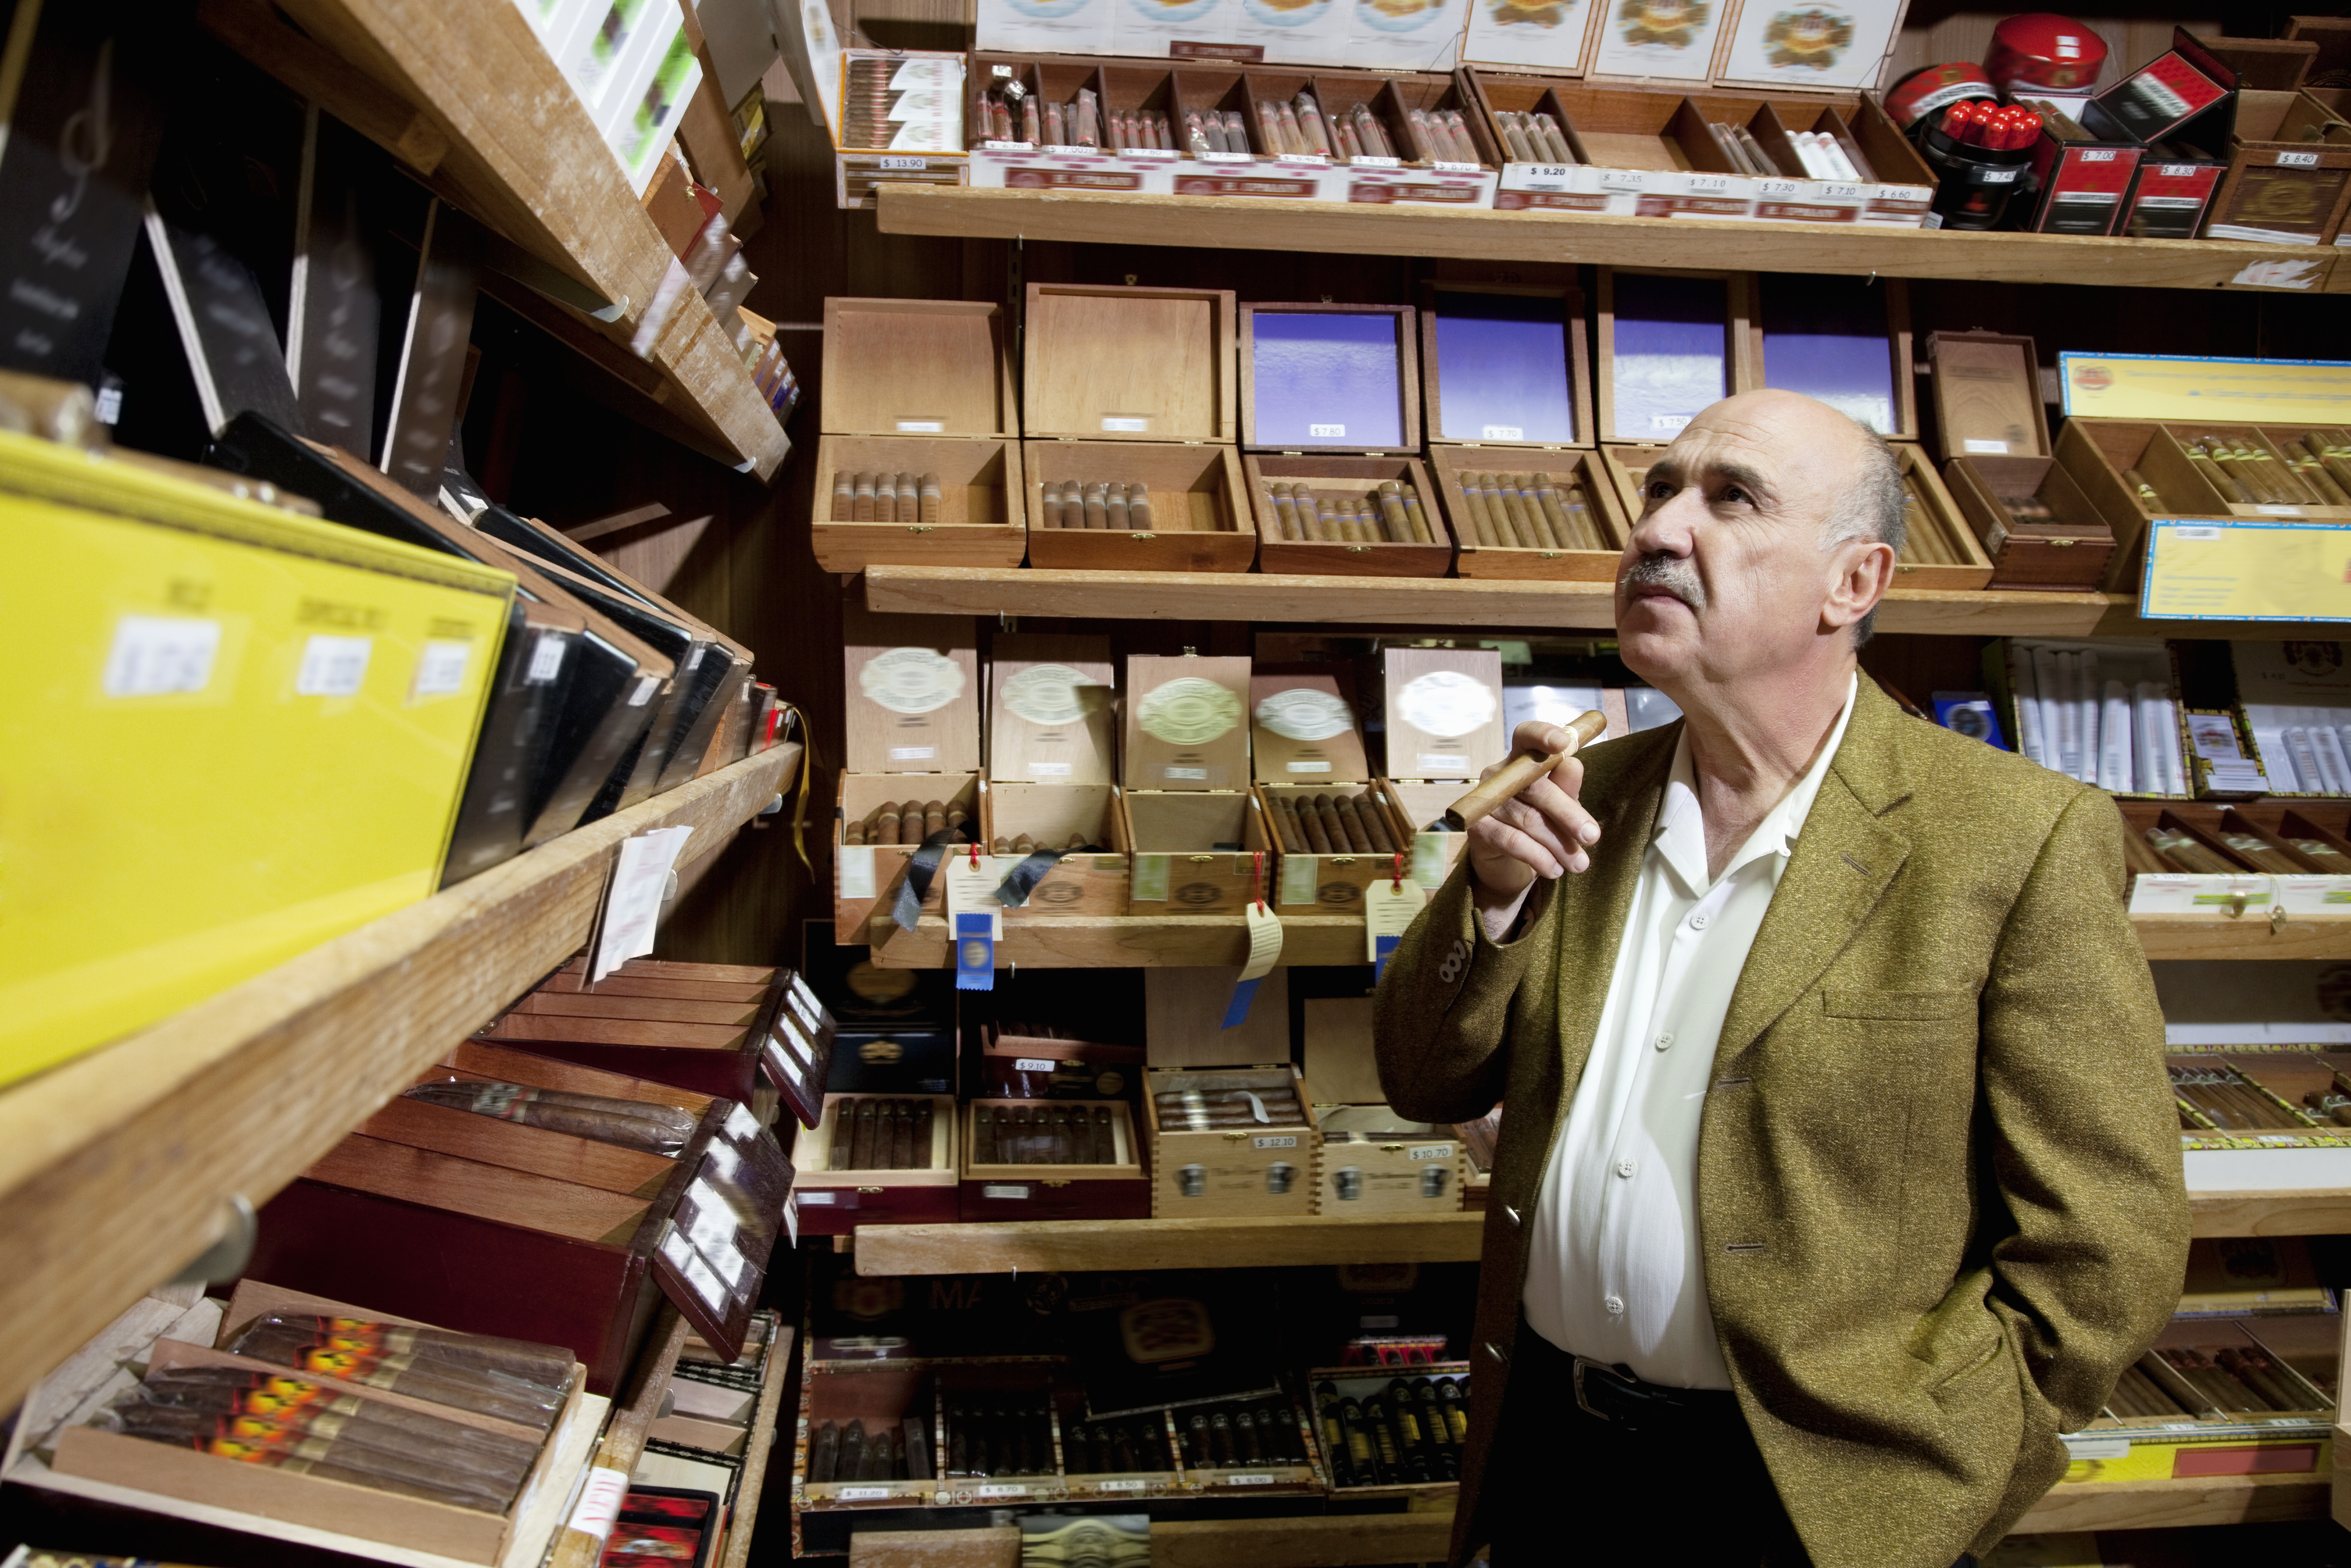 Where Can I Get Insurance For A Cigar Store In Canada?